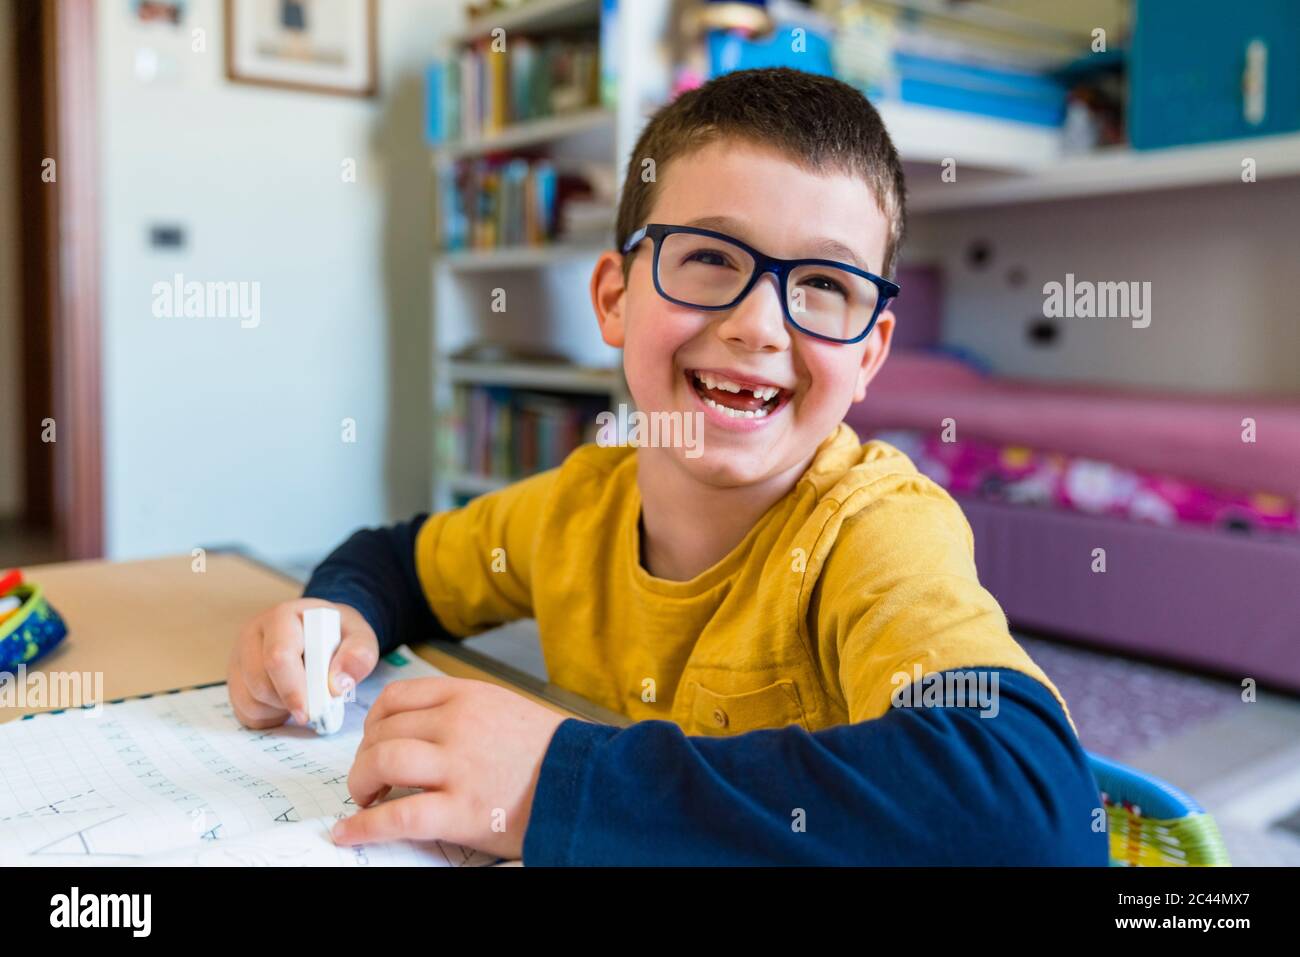 Cheerful cute student sitting with book at desk during pandemic outbreak Stock Photo